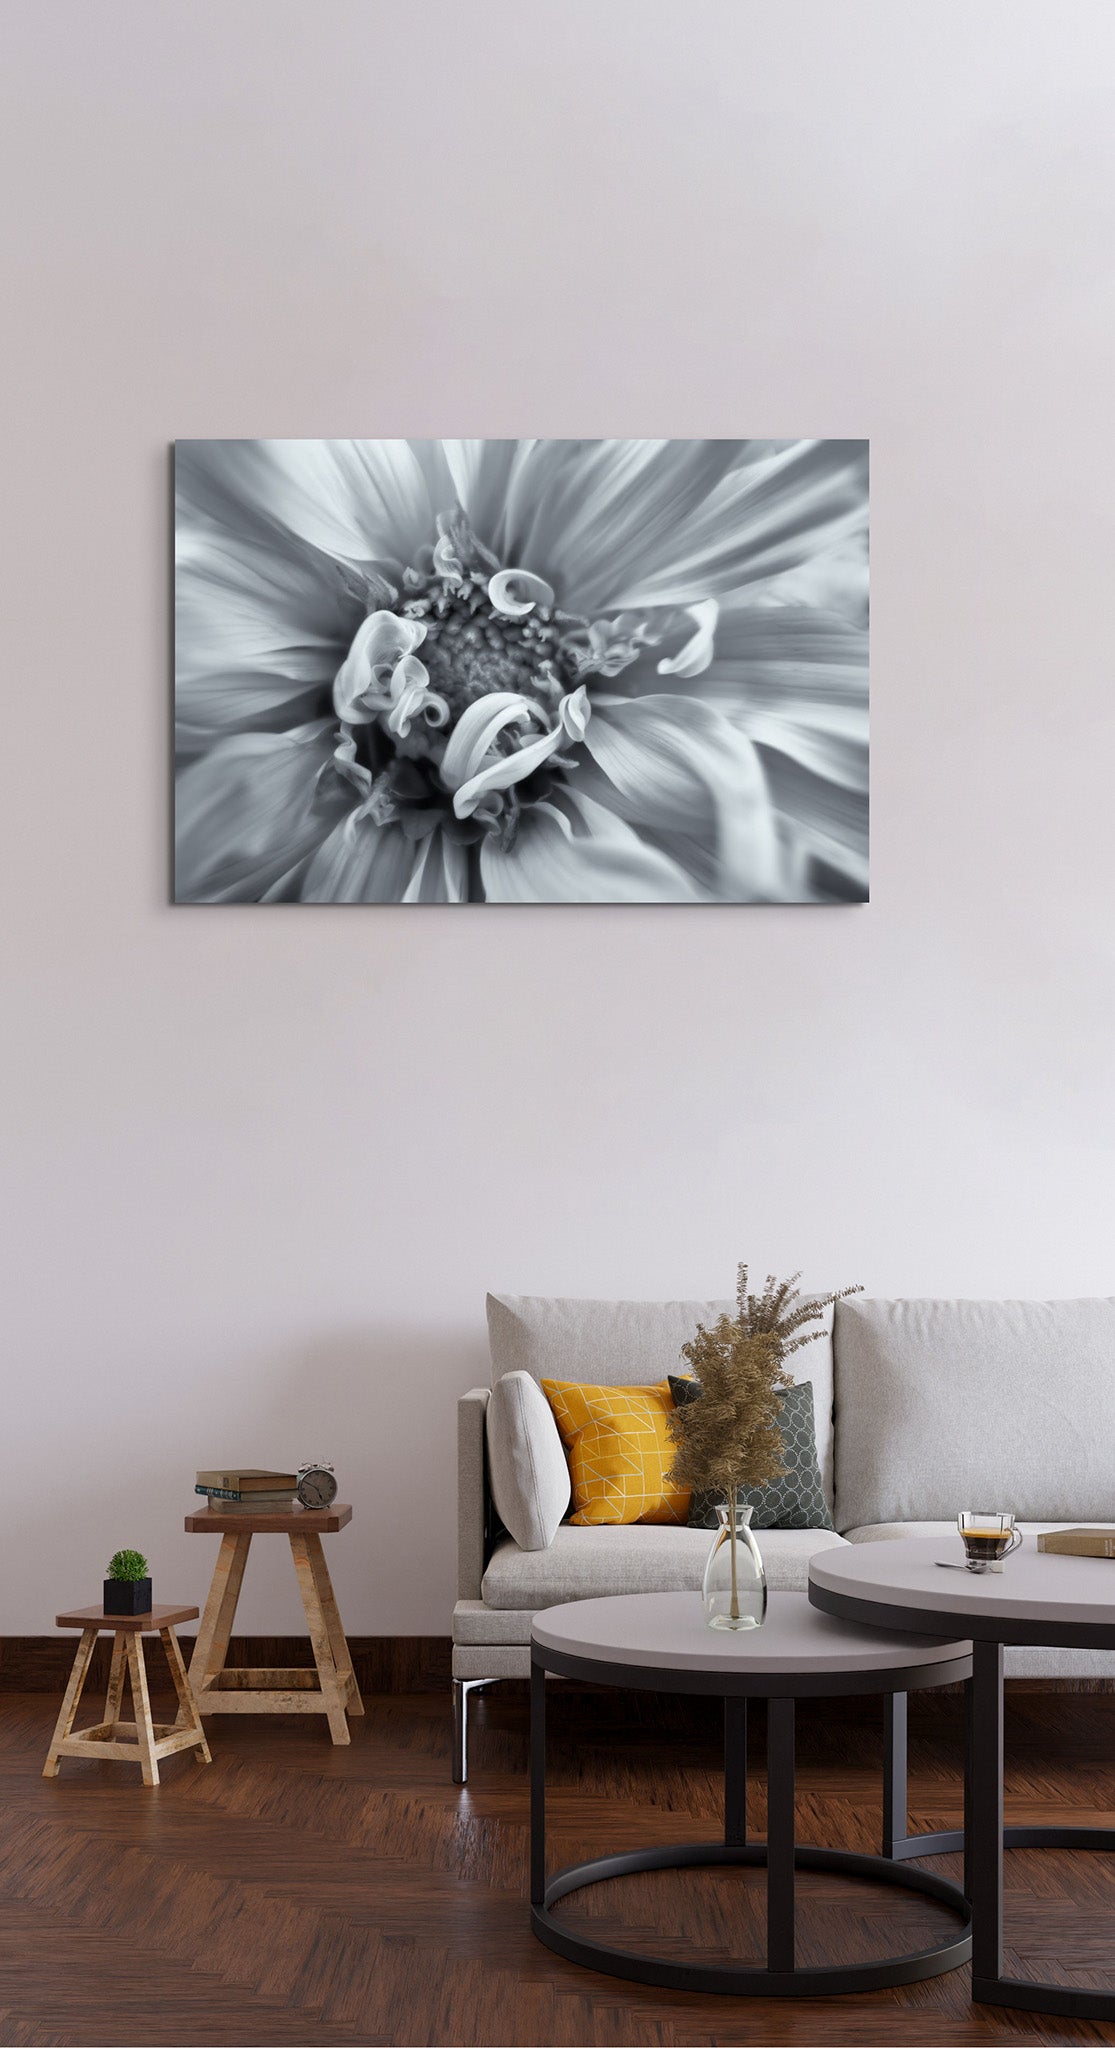 Picture hanging on the wall of a living room. The picture is a black and white flower photograph of a dahlia flower titled "A Dash of Elegance" by Cameron Dreaux of Dreaux Fine Art.